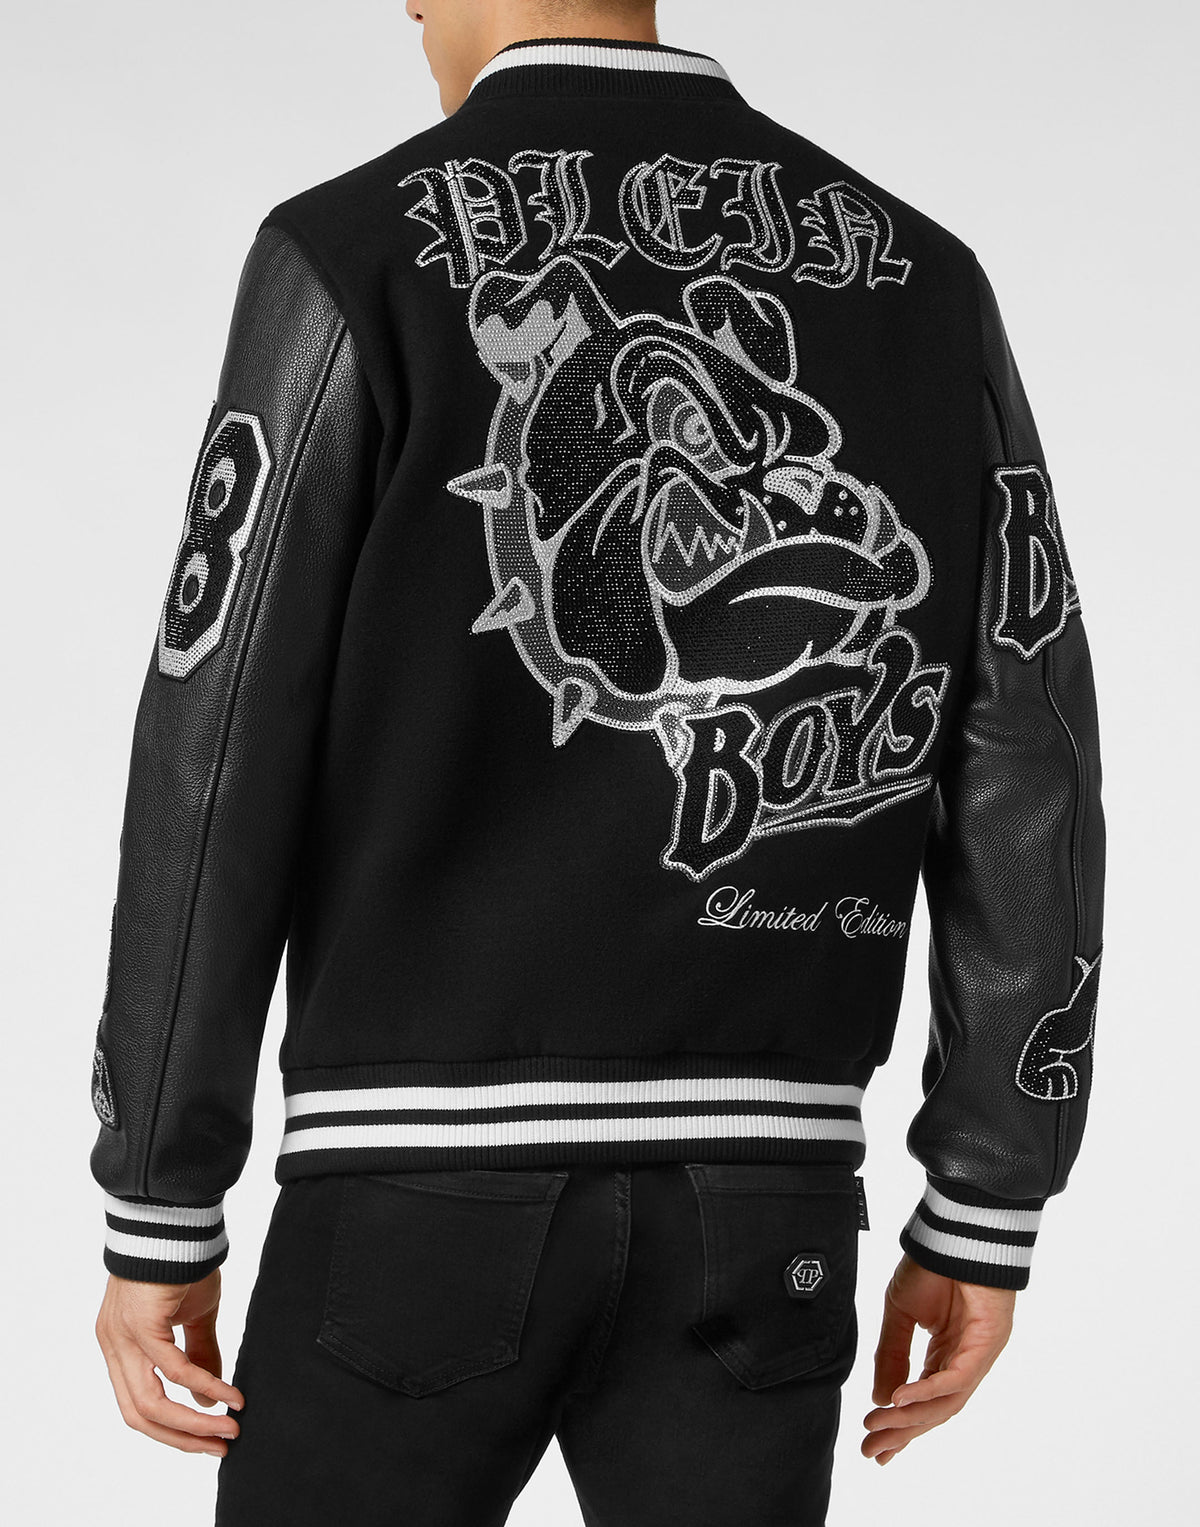 Woolen Cloth College Bomber With Leather Arms Bulldogs